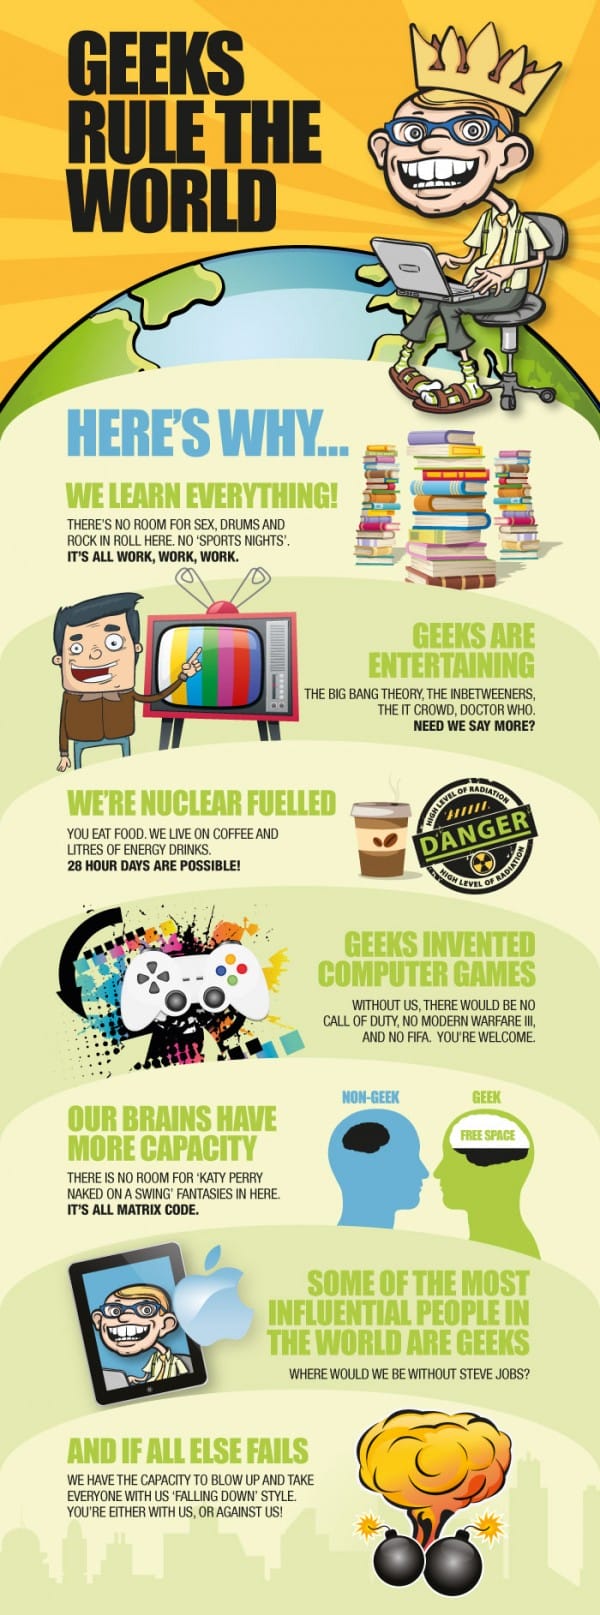 Why geeks rule the world? Infographic